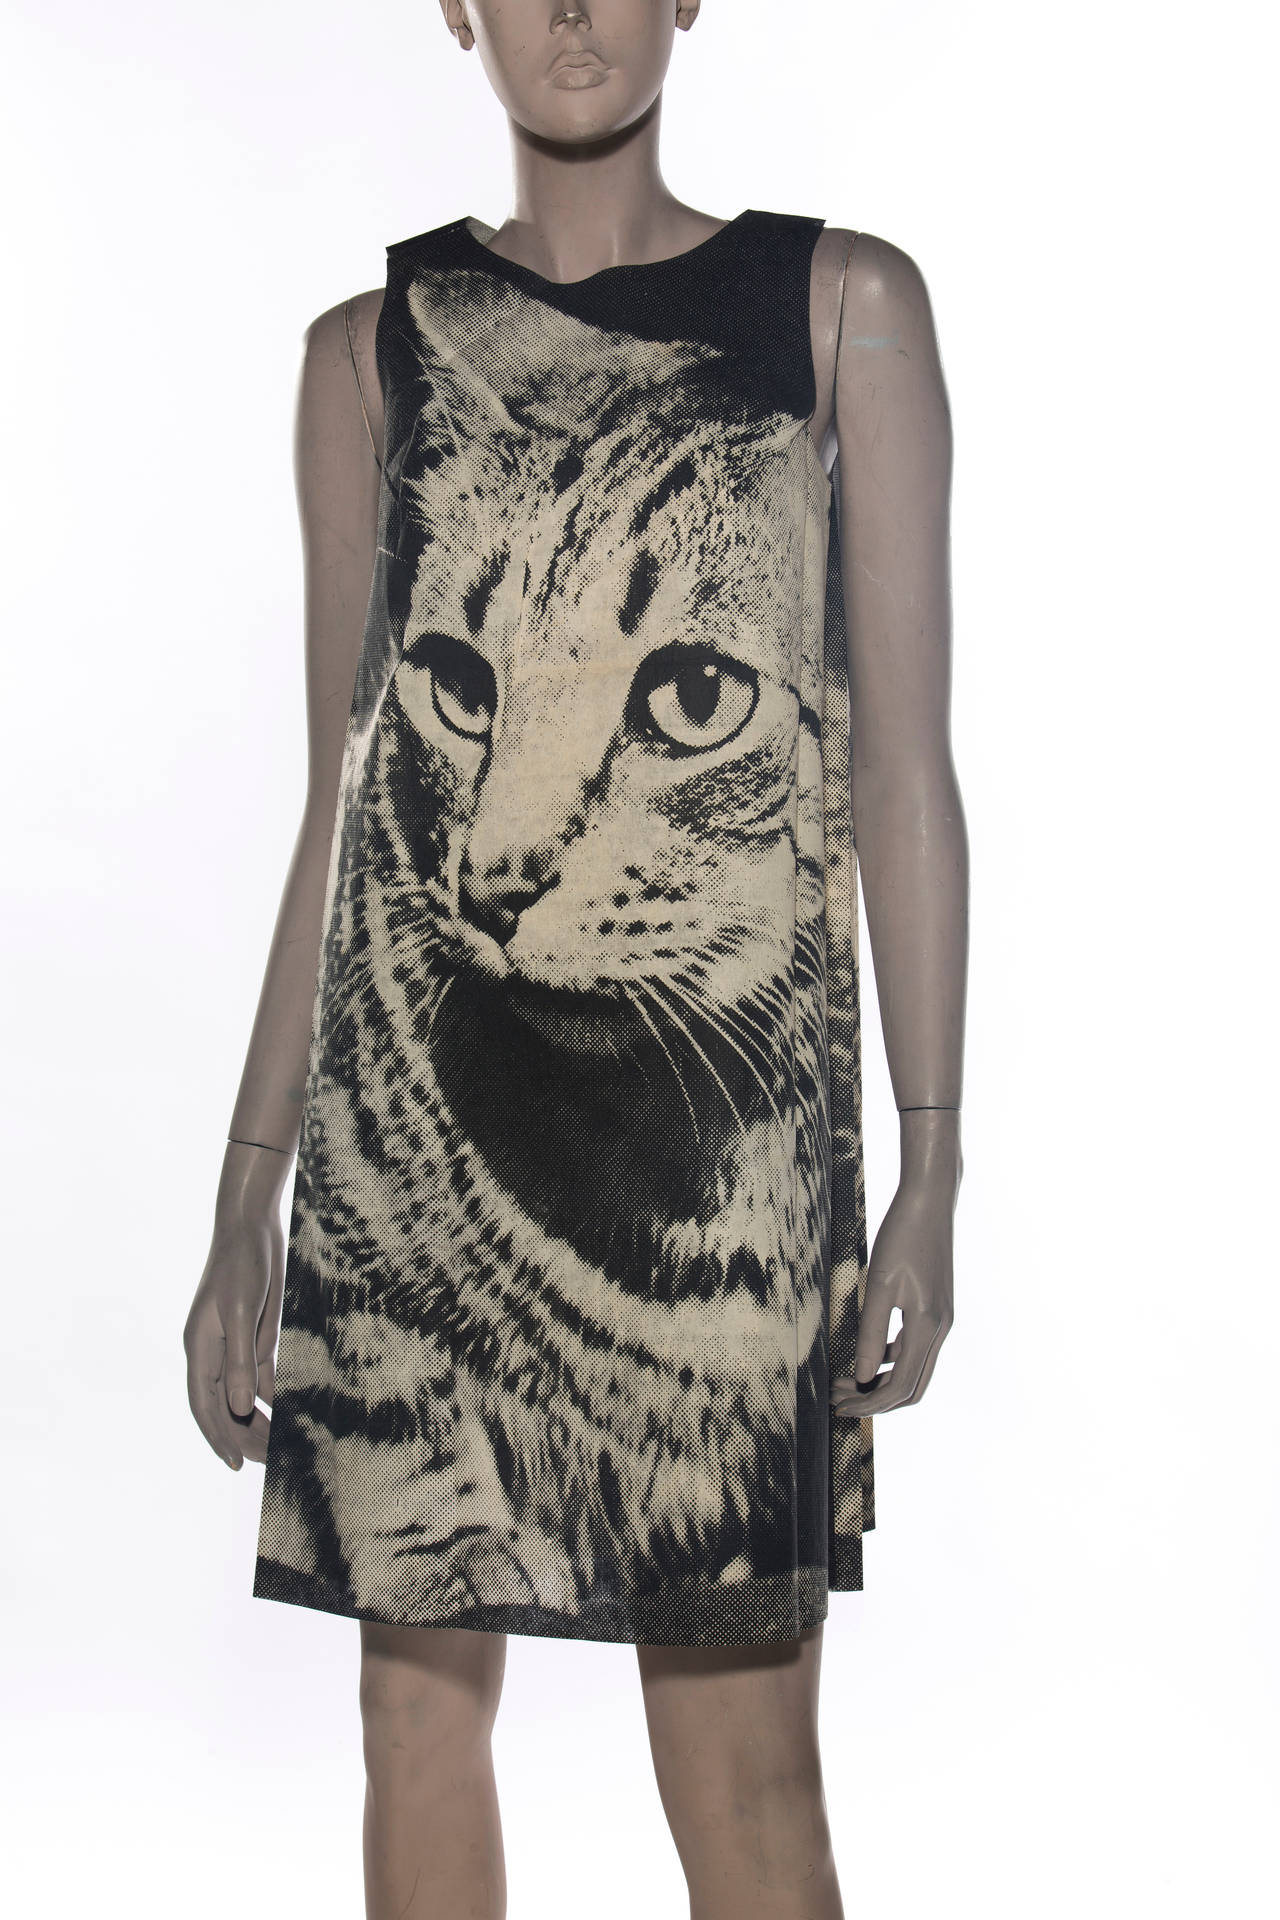 London series paper dress designed by Harry Gordon of a screen printed cat image.